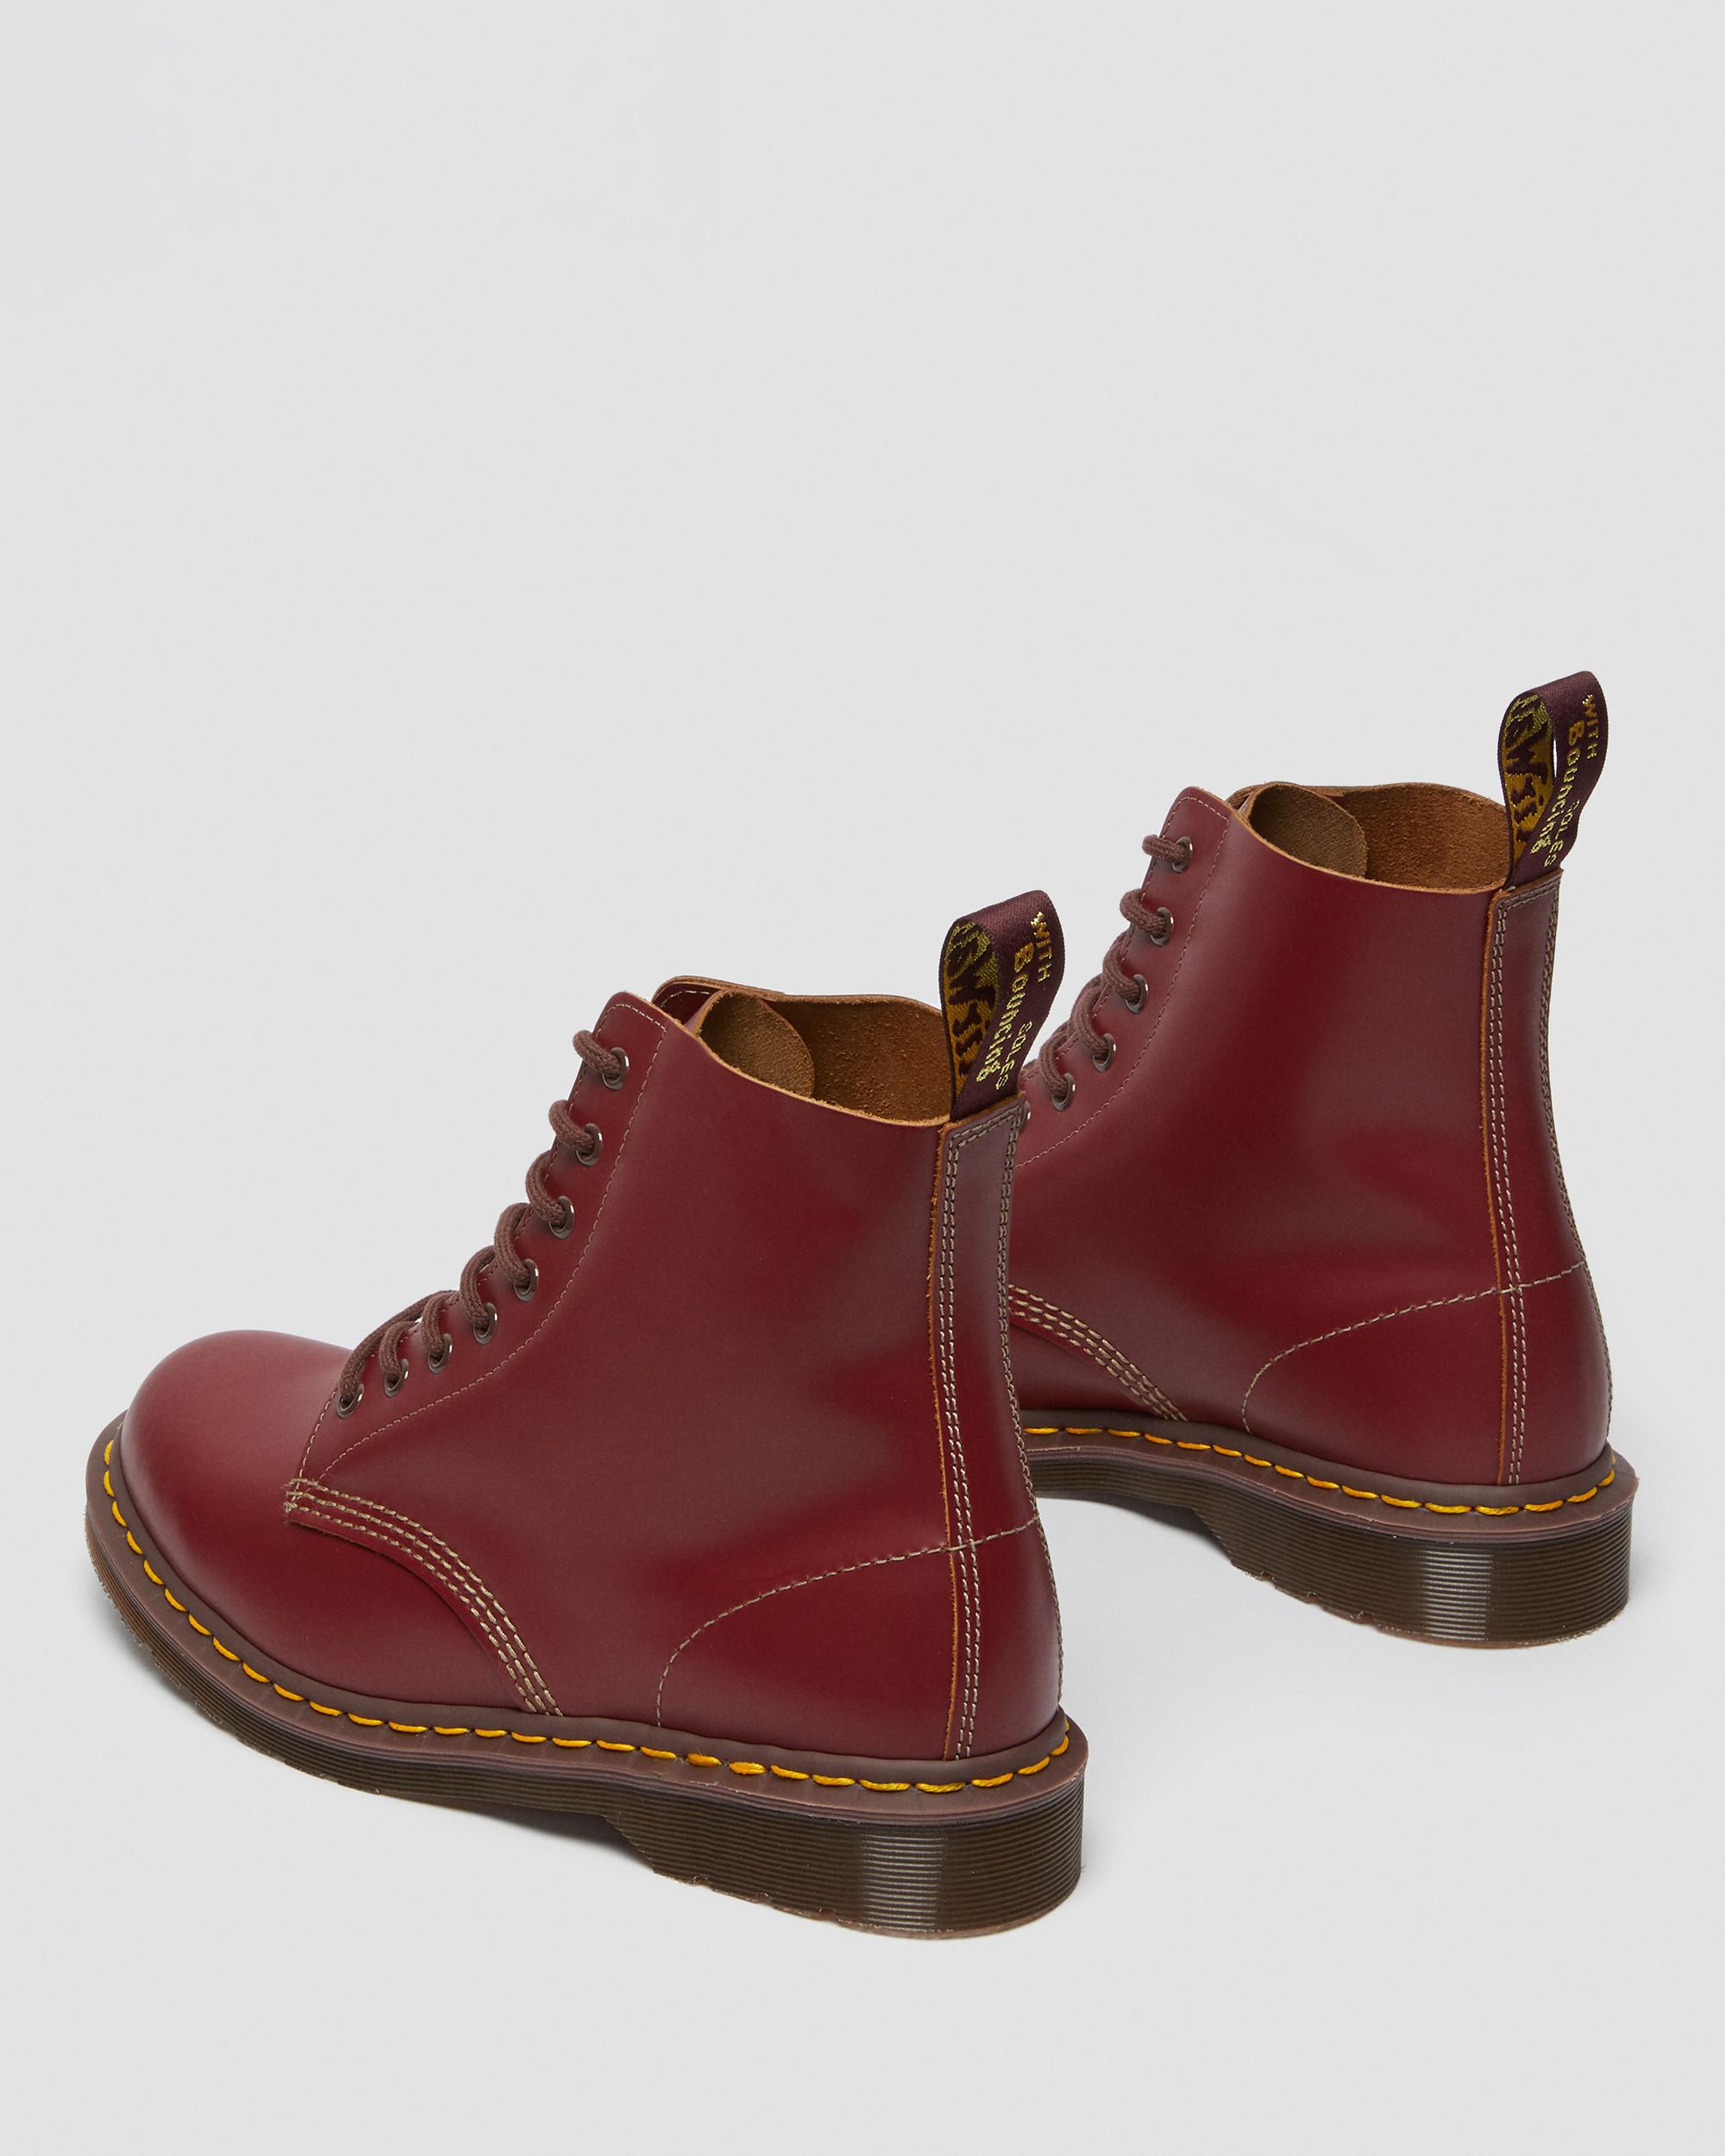 1460 Vintage Made in England Lace Up Boots | Dr. Martens